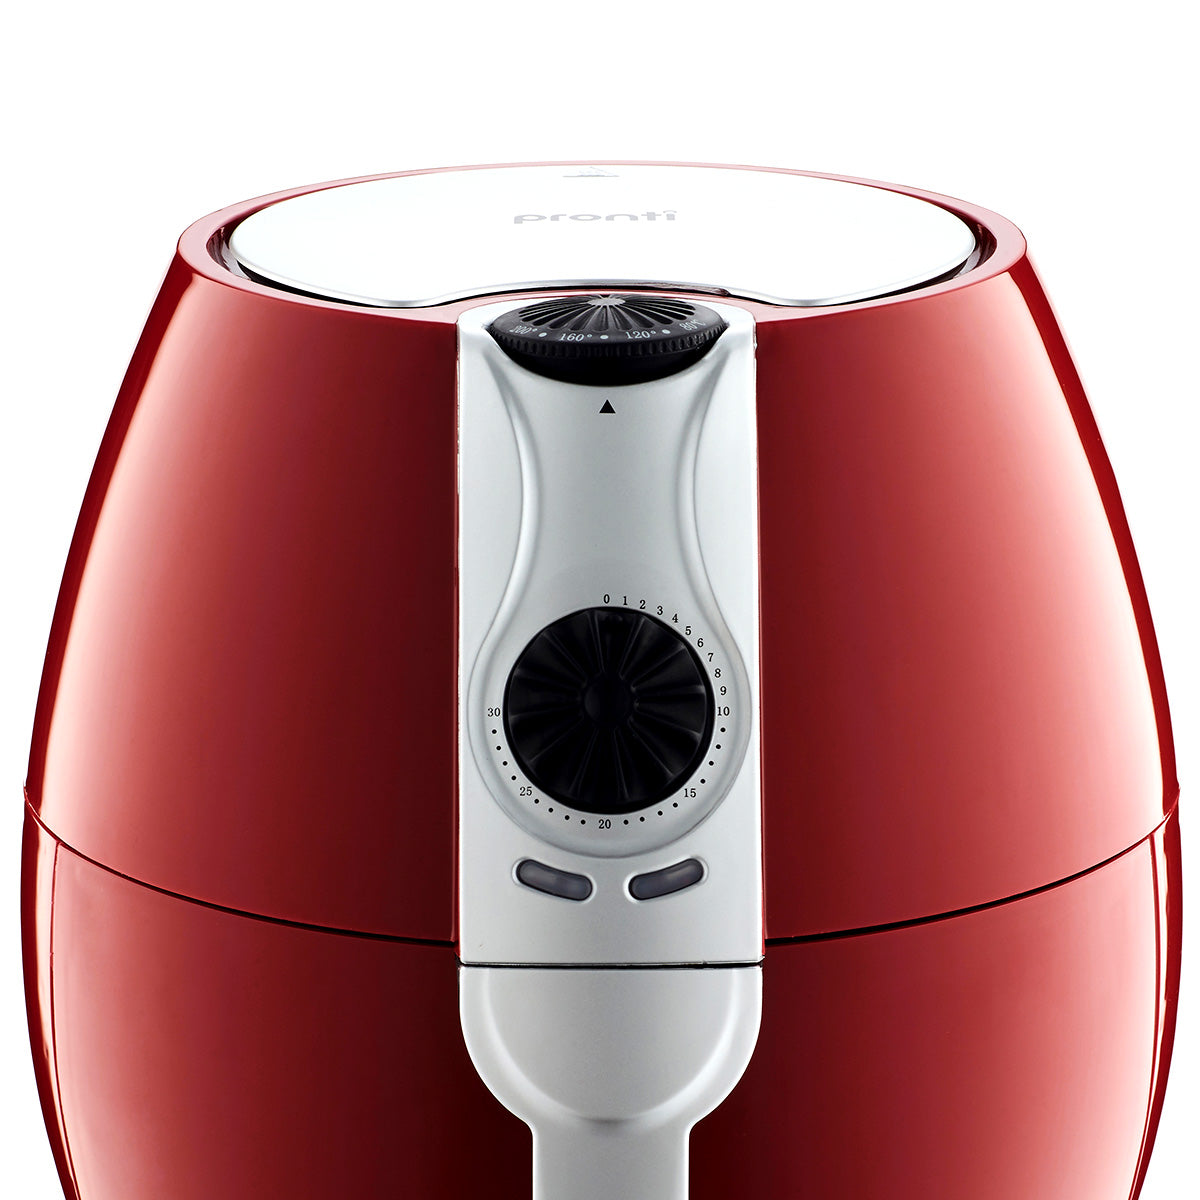 Pronti Air Fryer Cooker 4.0L HF-989 - Red